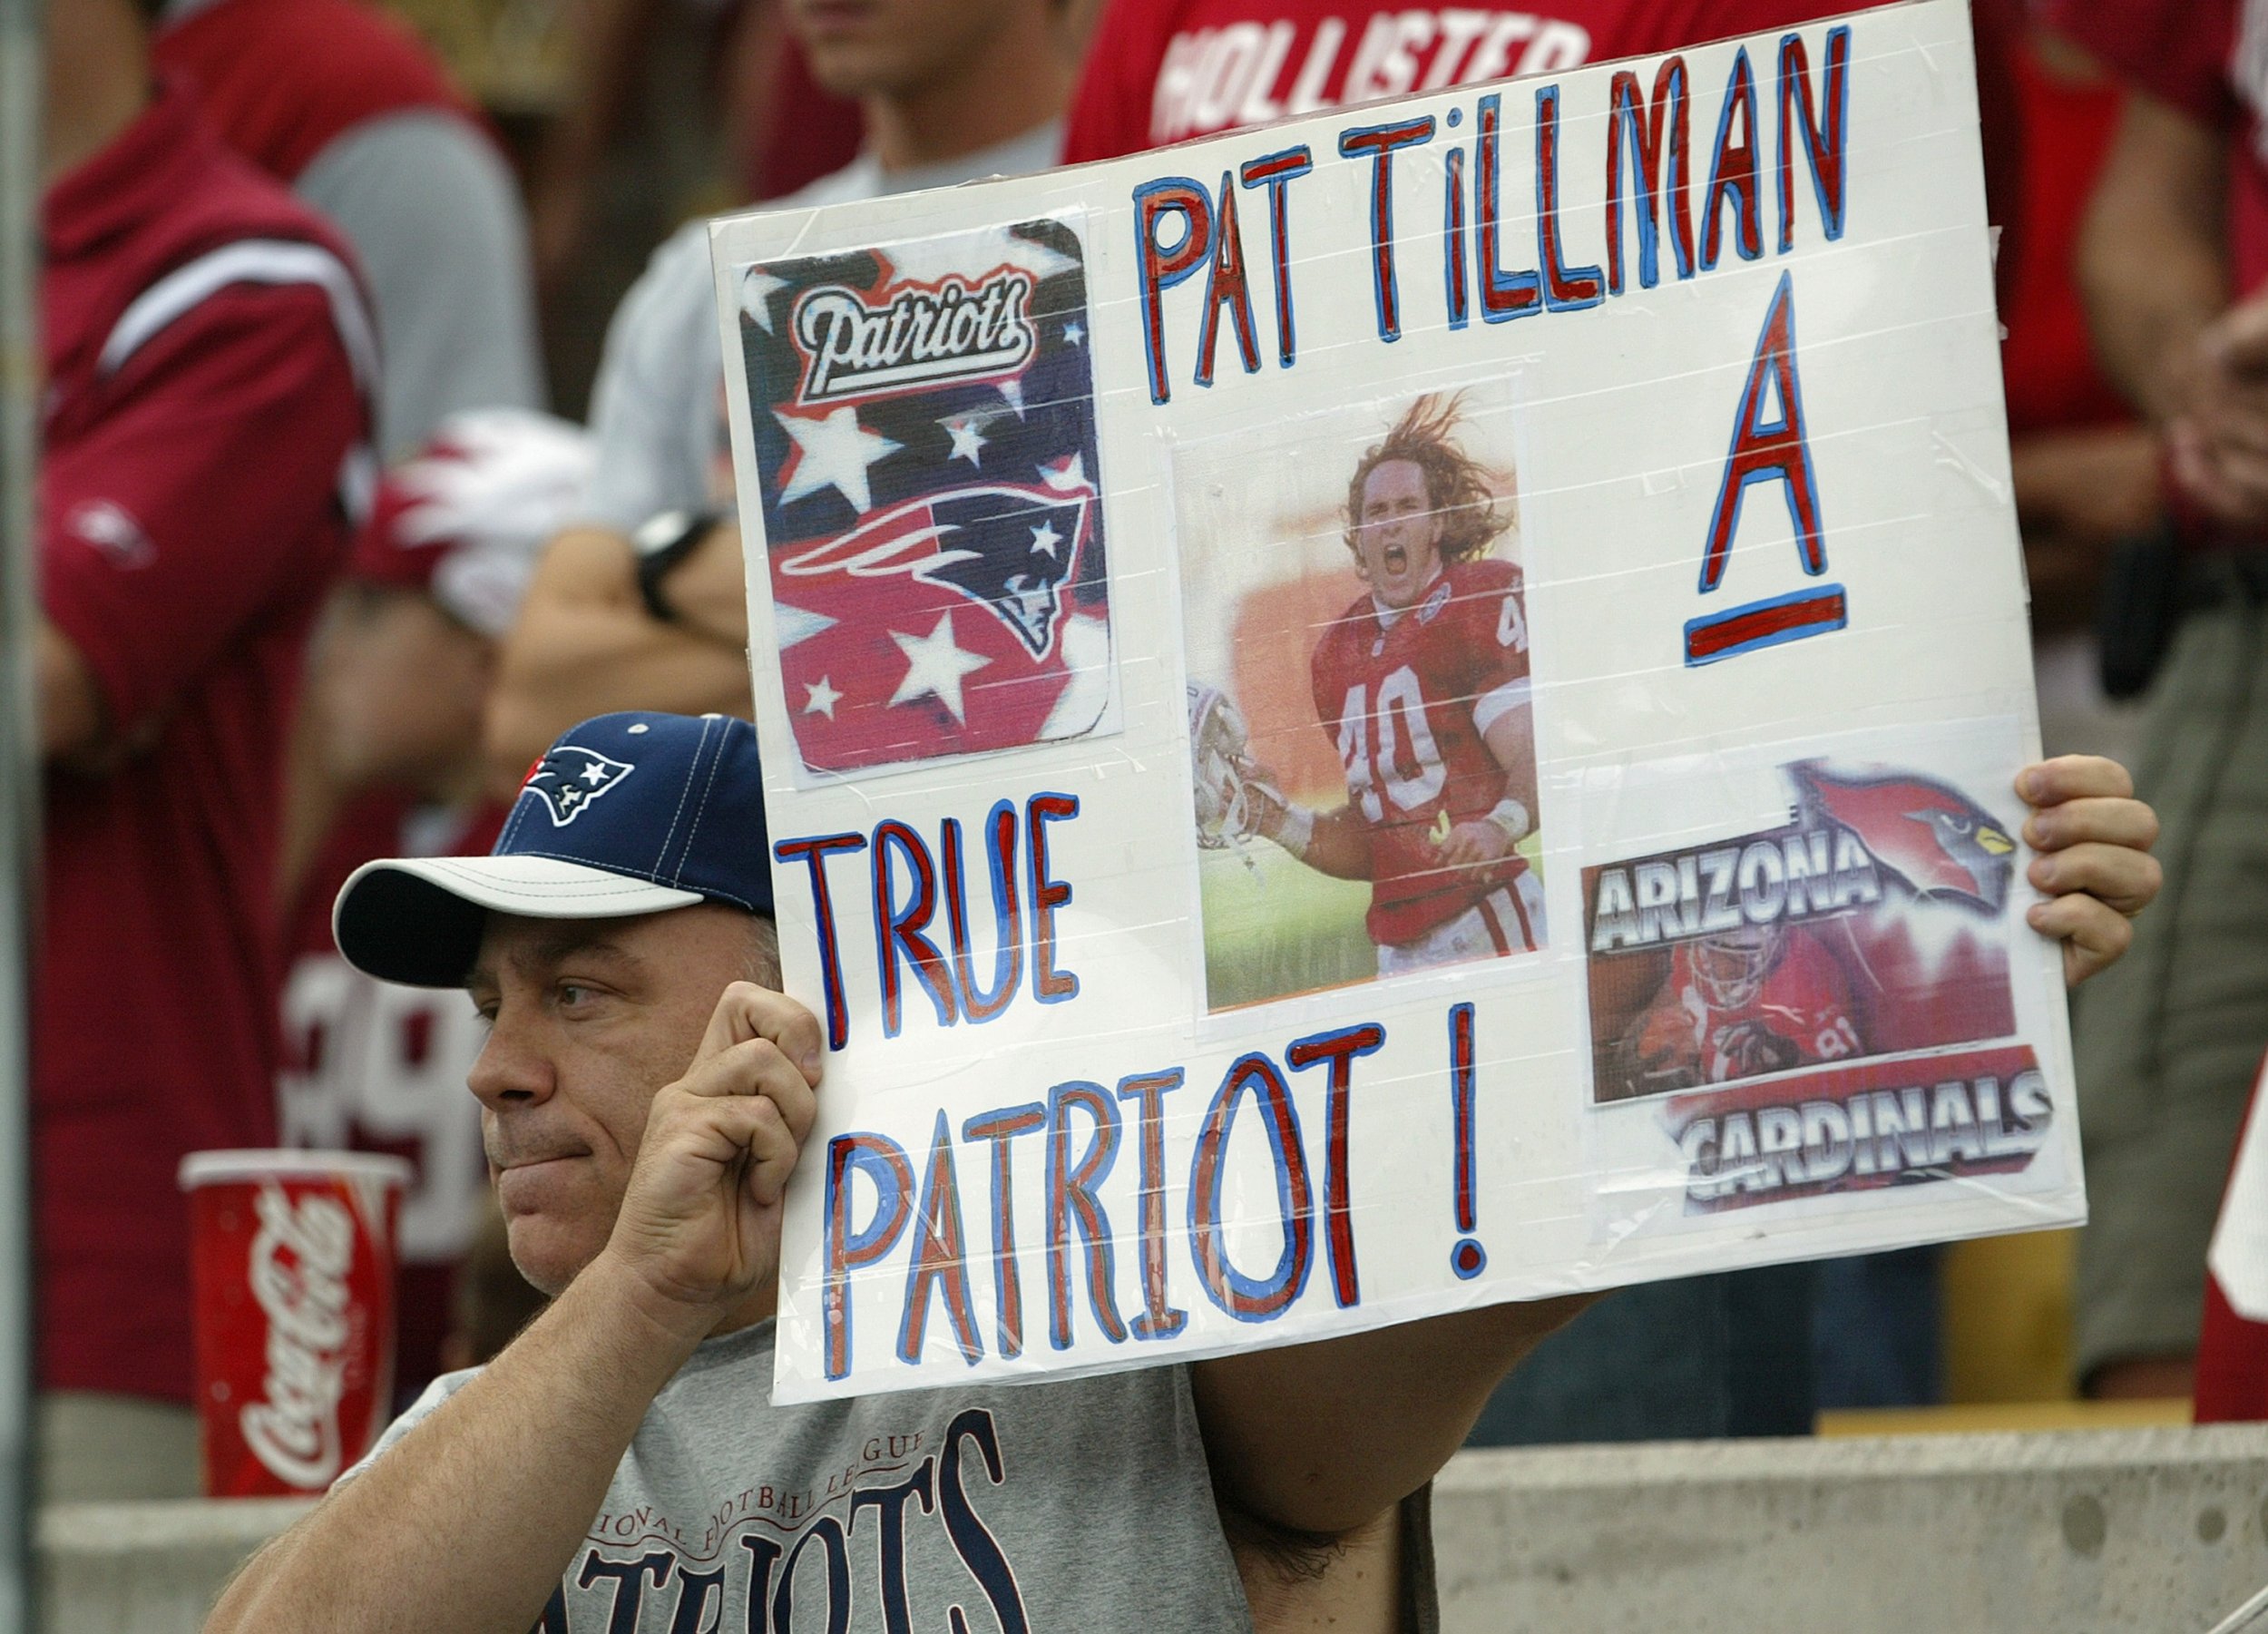 Despite national backlash, many support appearance of Pat Tillman statue in  NFL ad, Sports